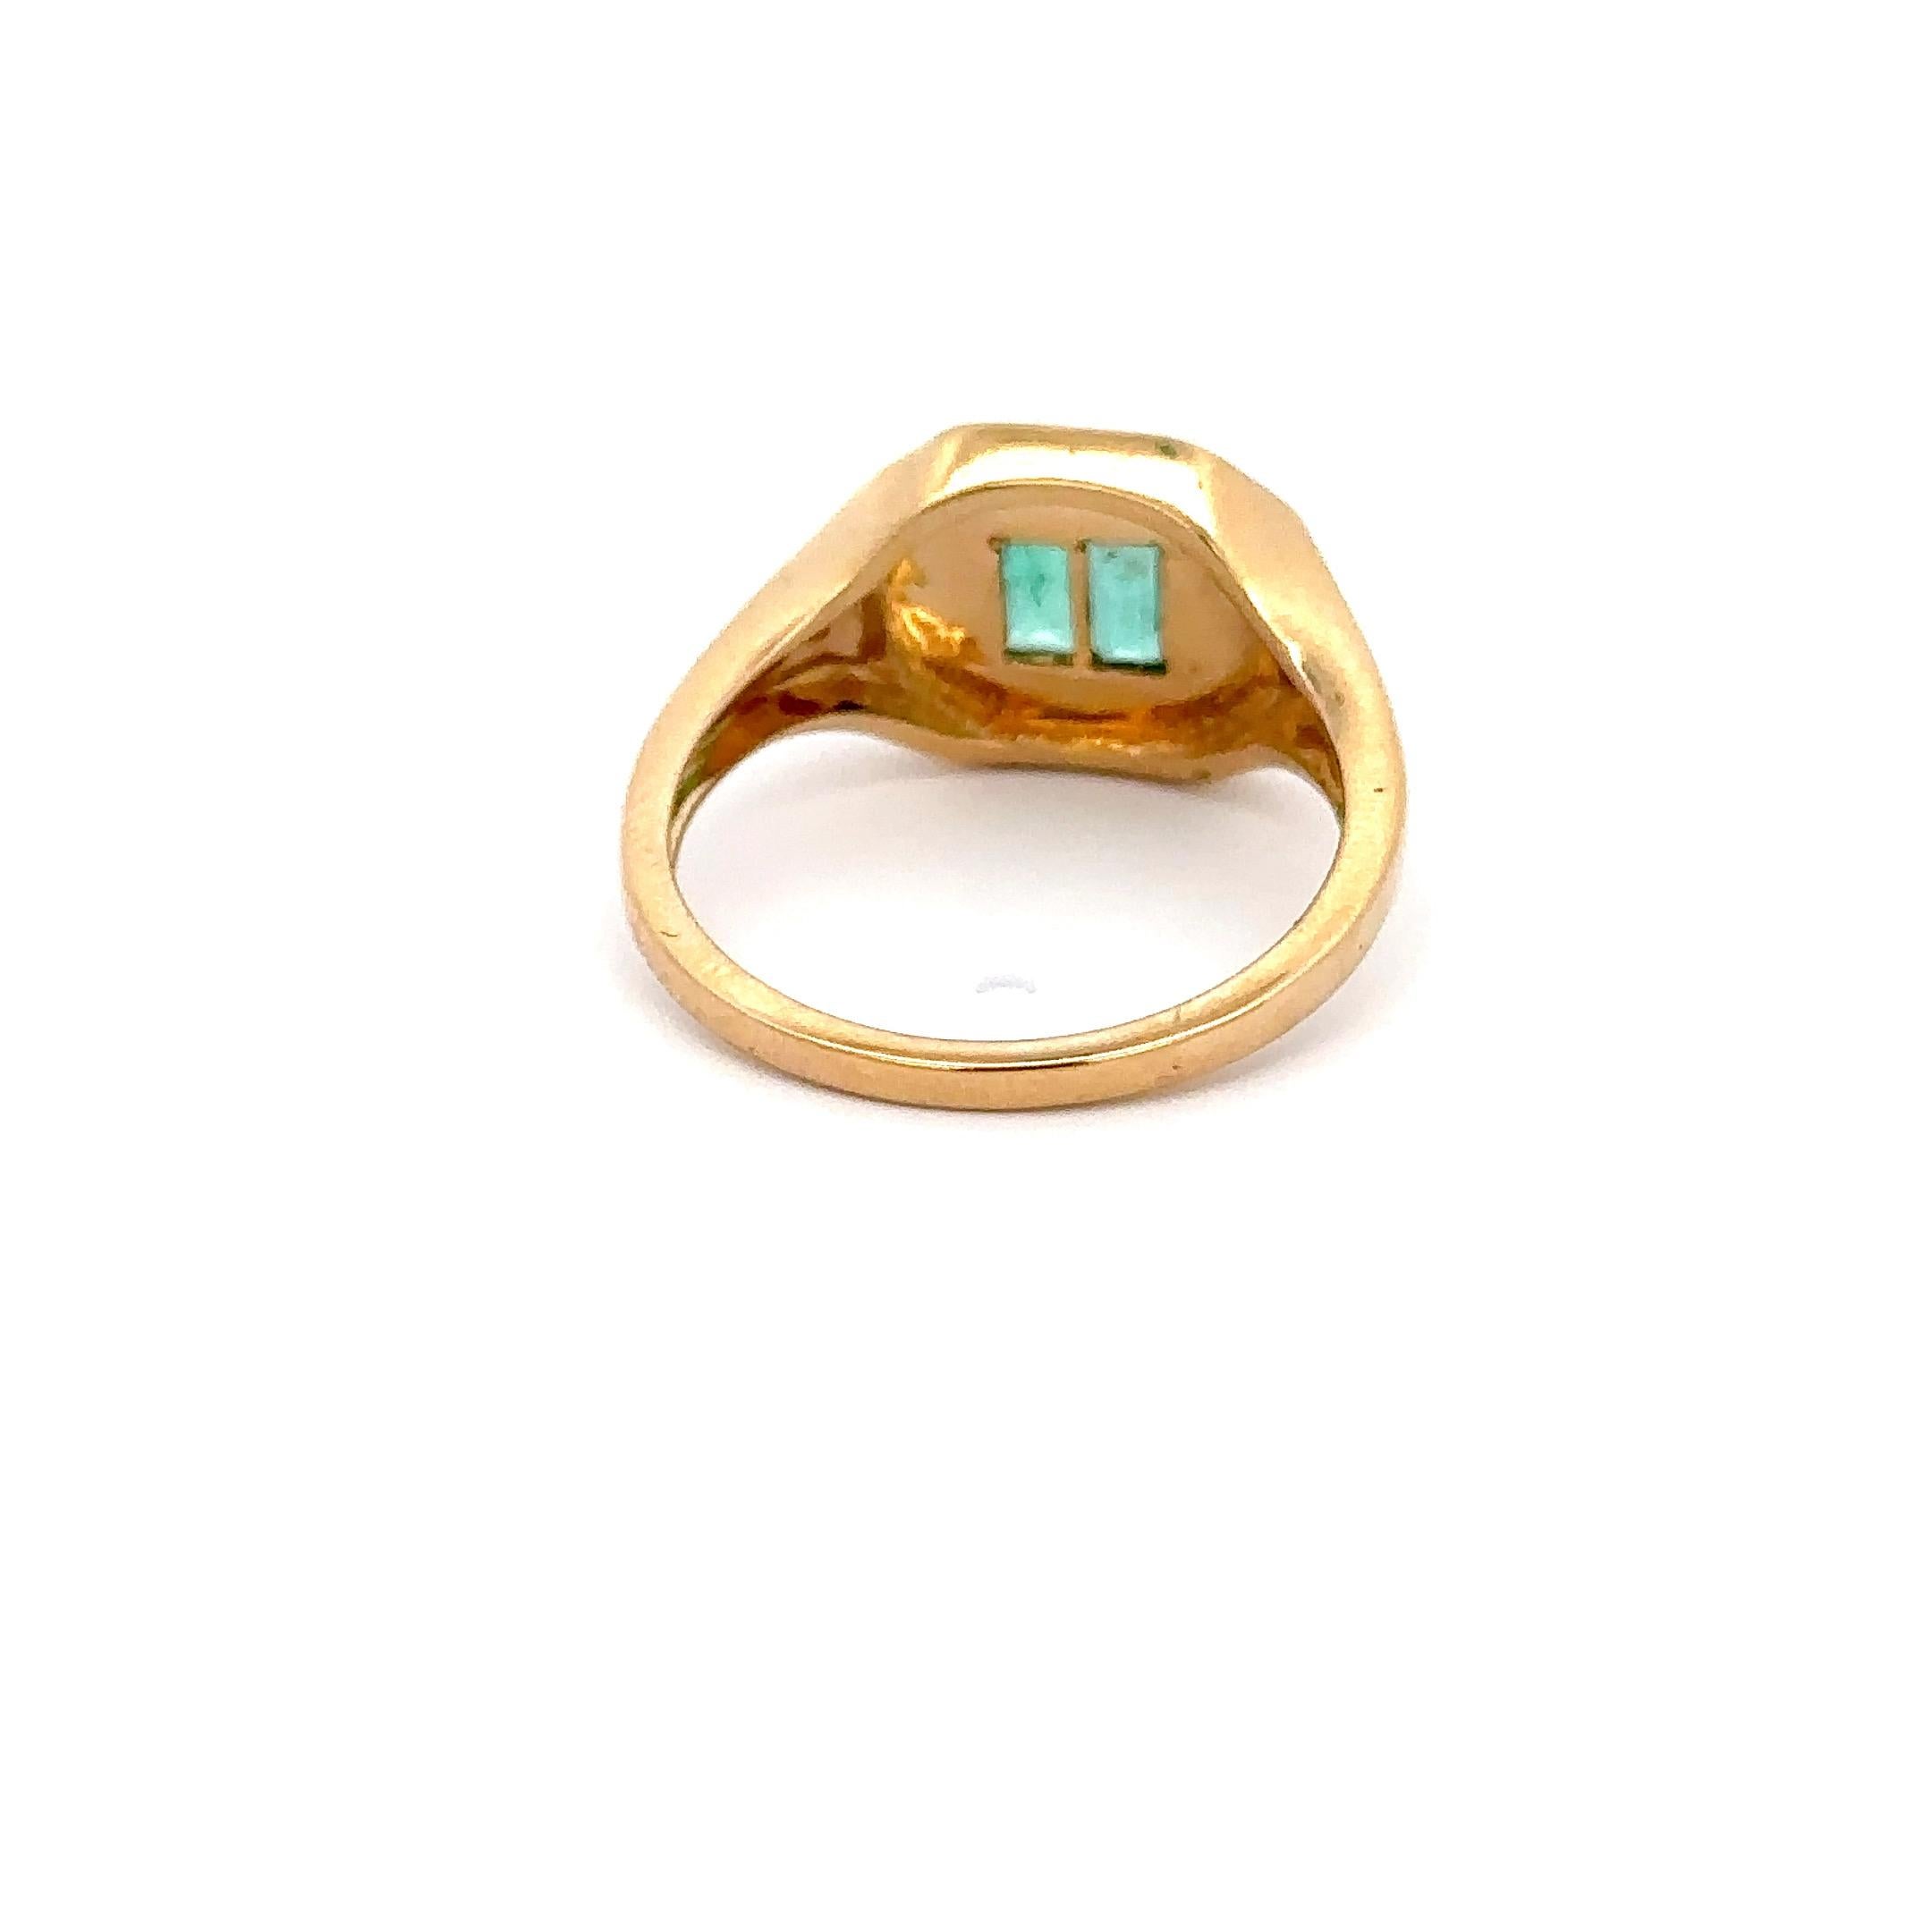 For Sale:  Certified Natural Emerald Signet Ring 14kt Solid Yellow Gold Pinky Ring 2